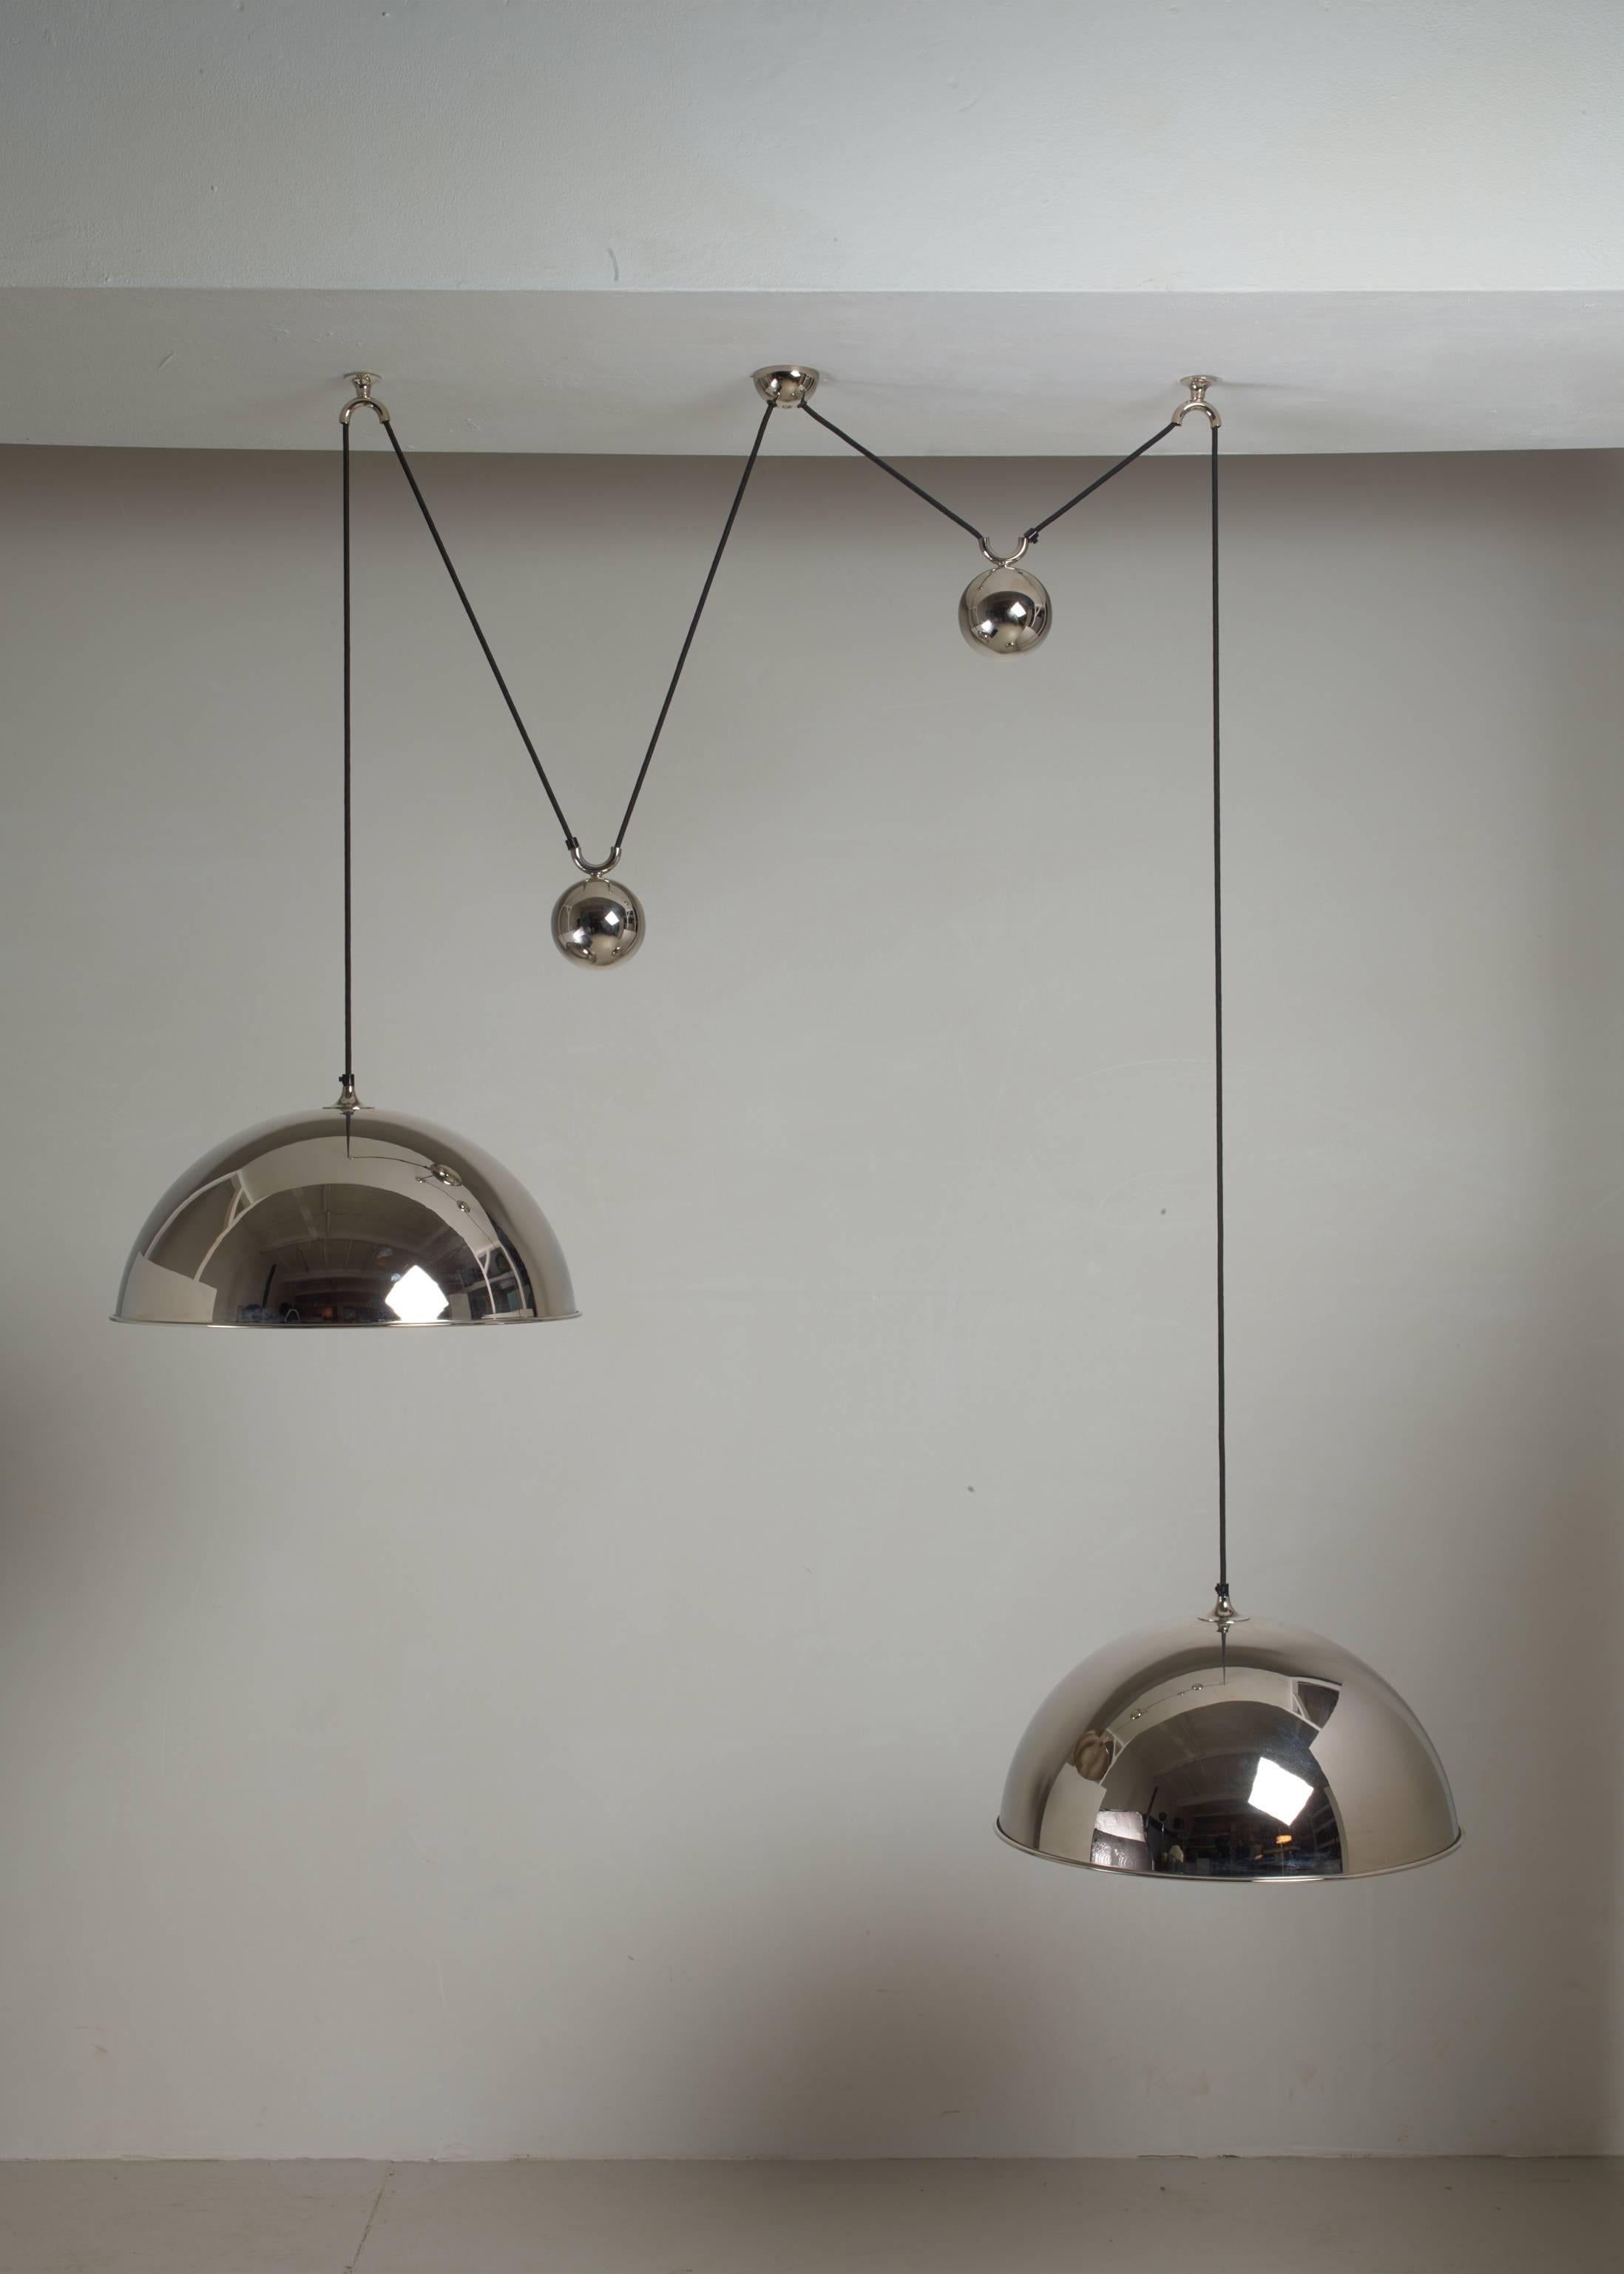 Late 20th Century Florian Schulz Double Nickel Posa Pendants with Counterweights, Germany